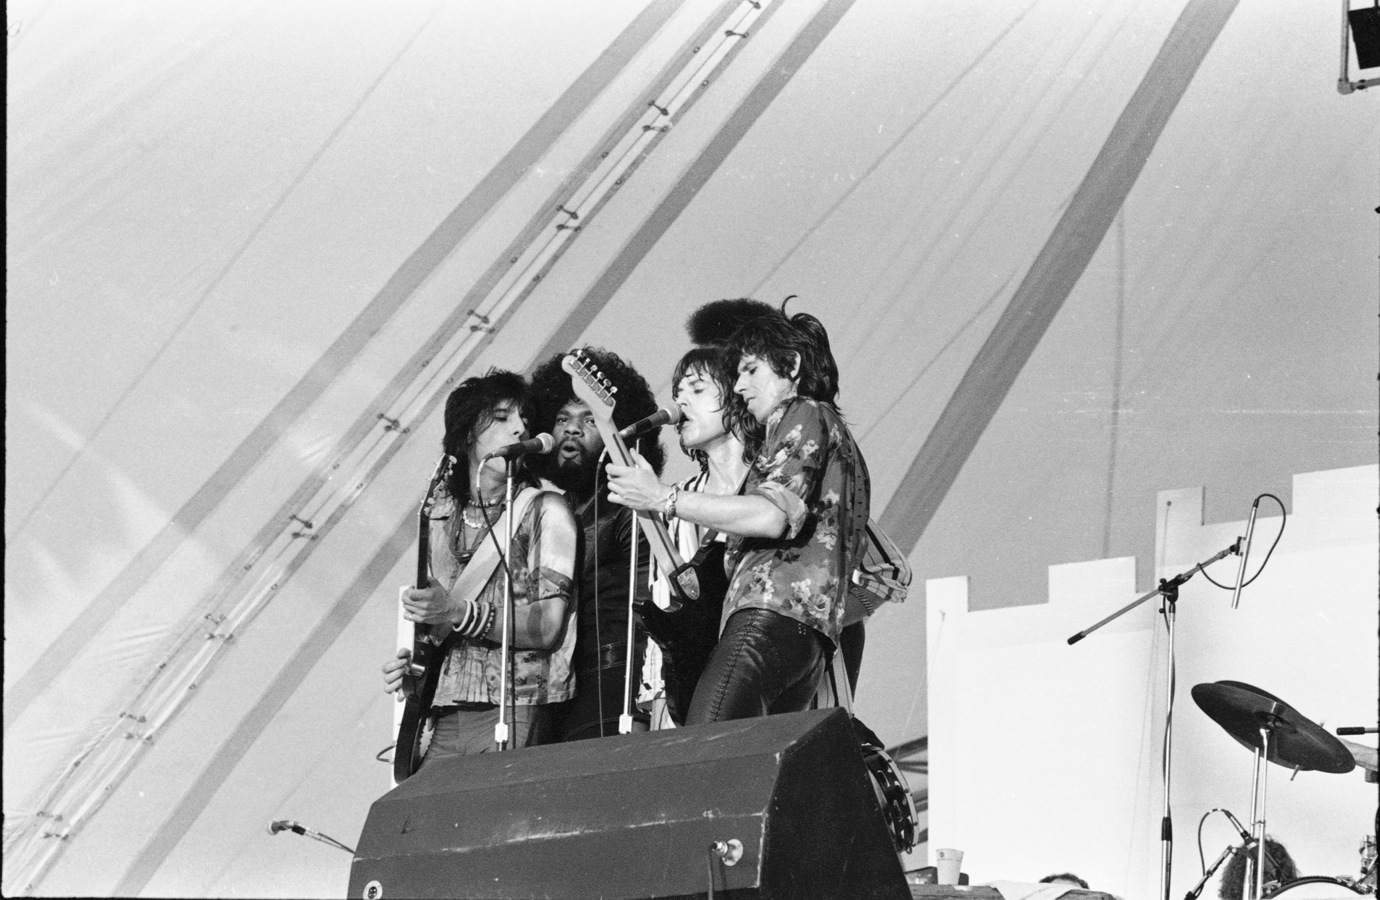 Ron Wood, the Late Billy Preston, Mick Jagger & Keith Richards.